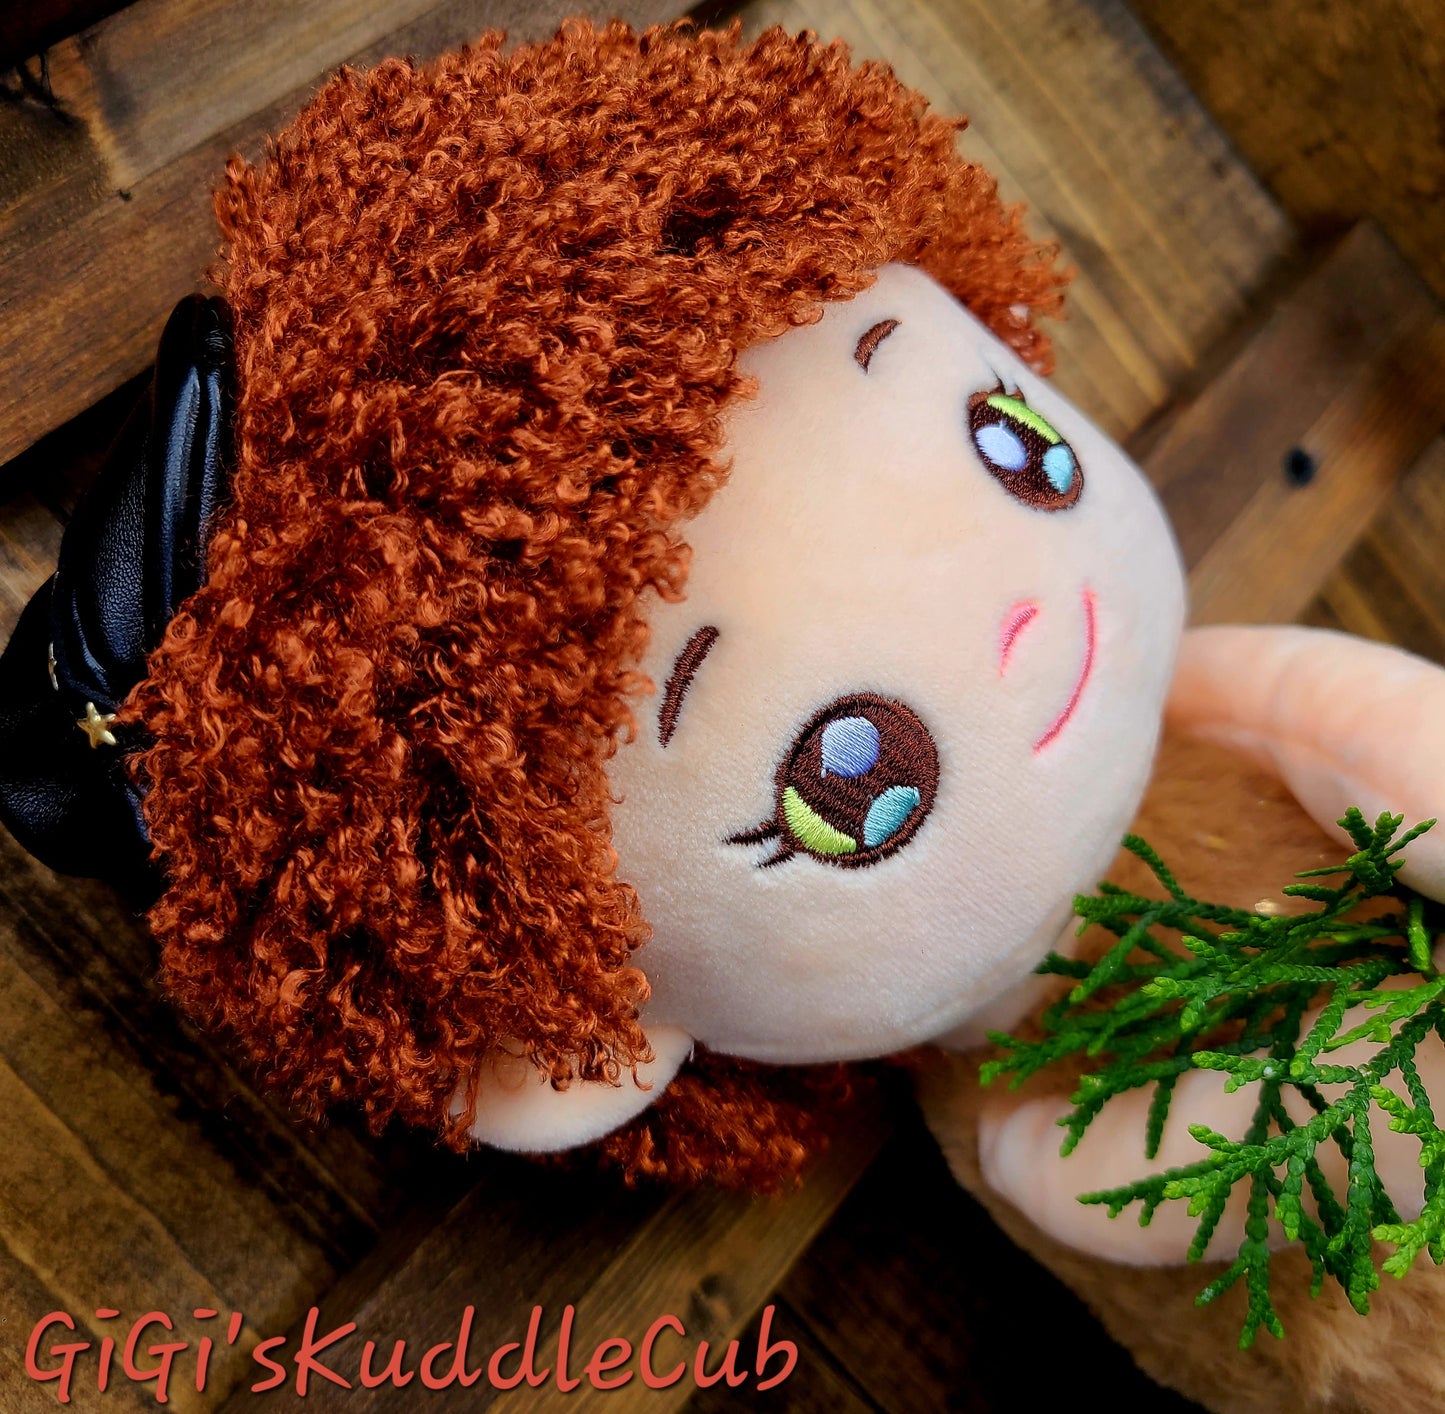 Personalized Soft Plush 15in Curly Red Hair With Cute Hat Rag Doll Plush Toy/ Decor/Handmade Baby Gift Toy